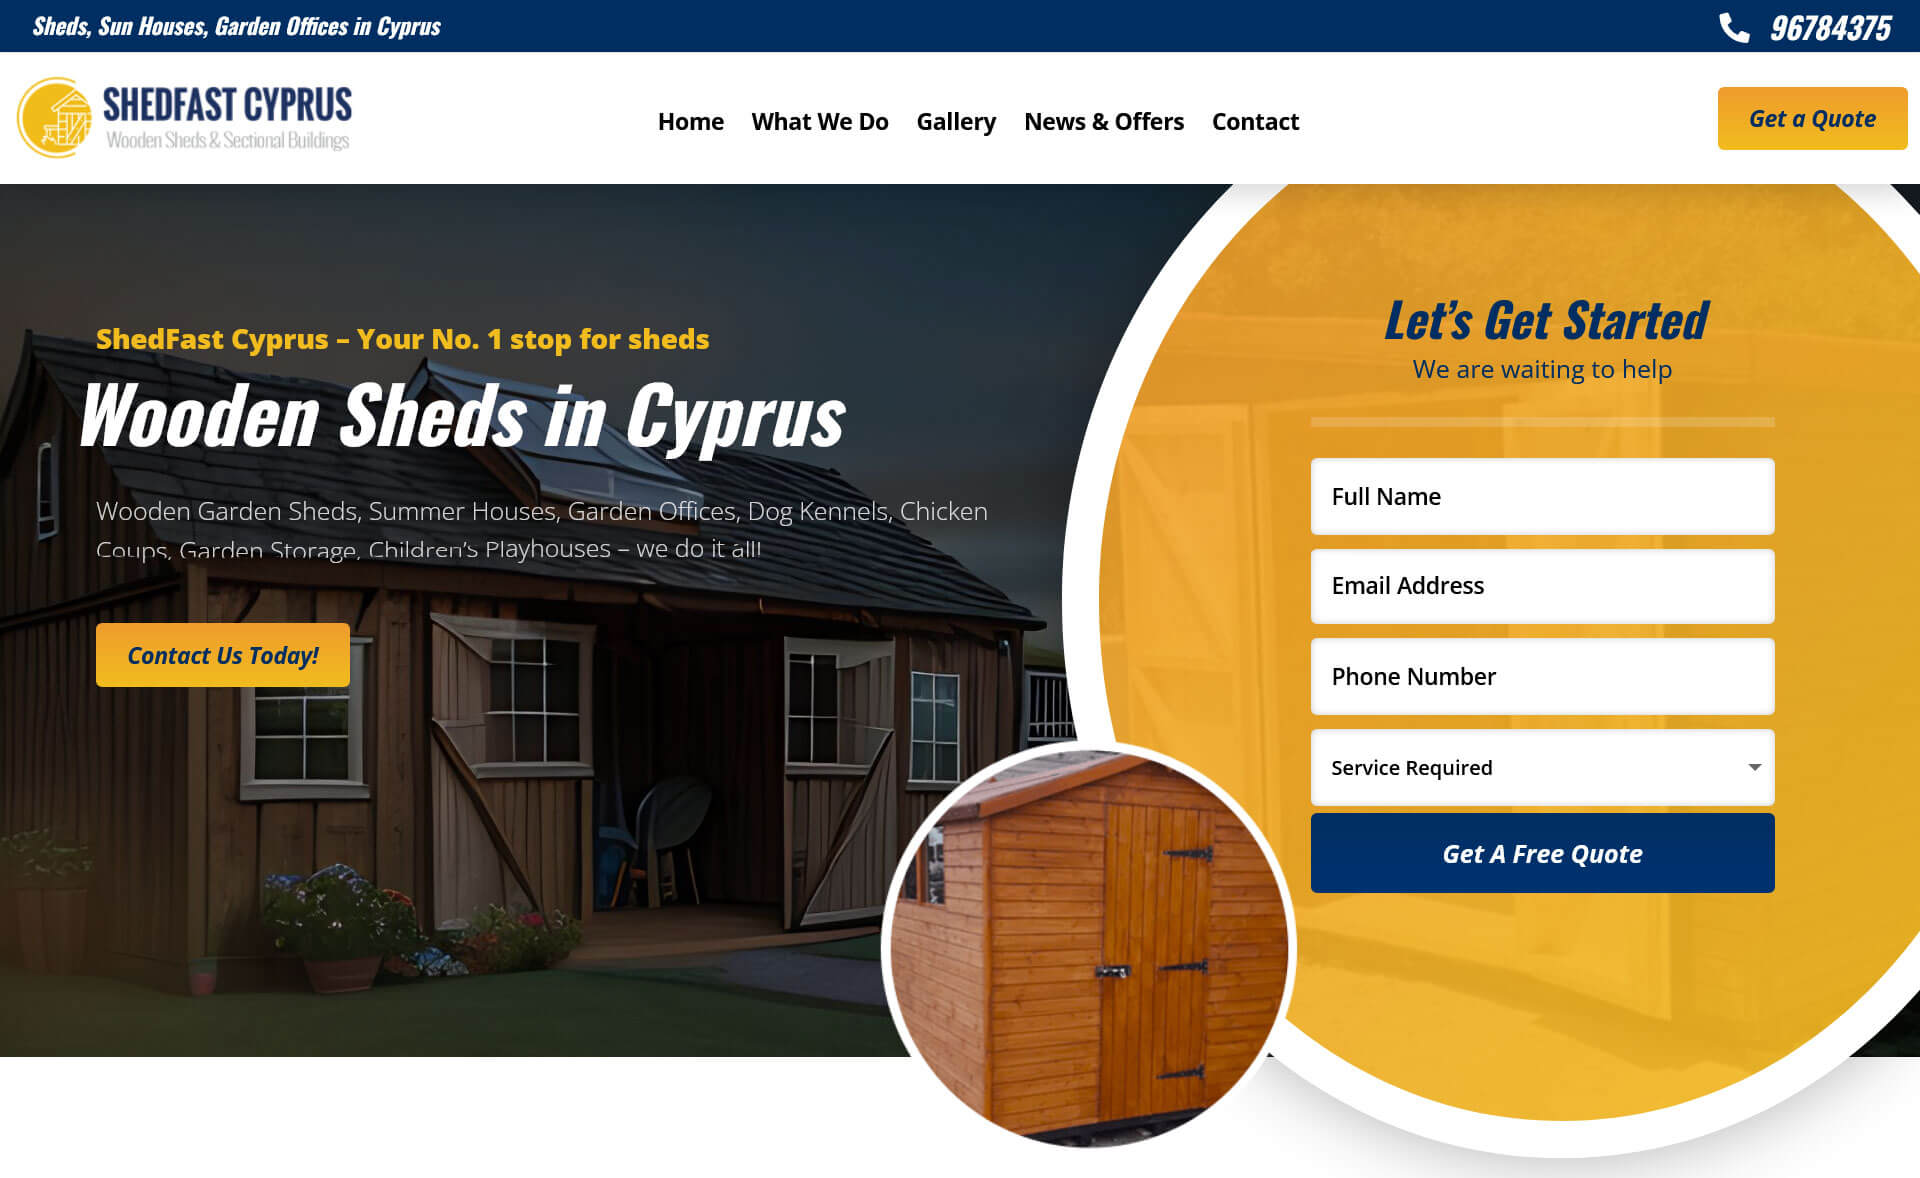 Paphos Web Design - New Website for Sheds Cyprus known as ShedFast